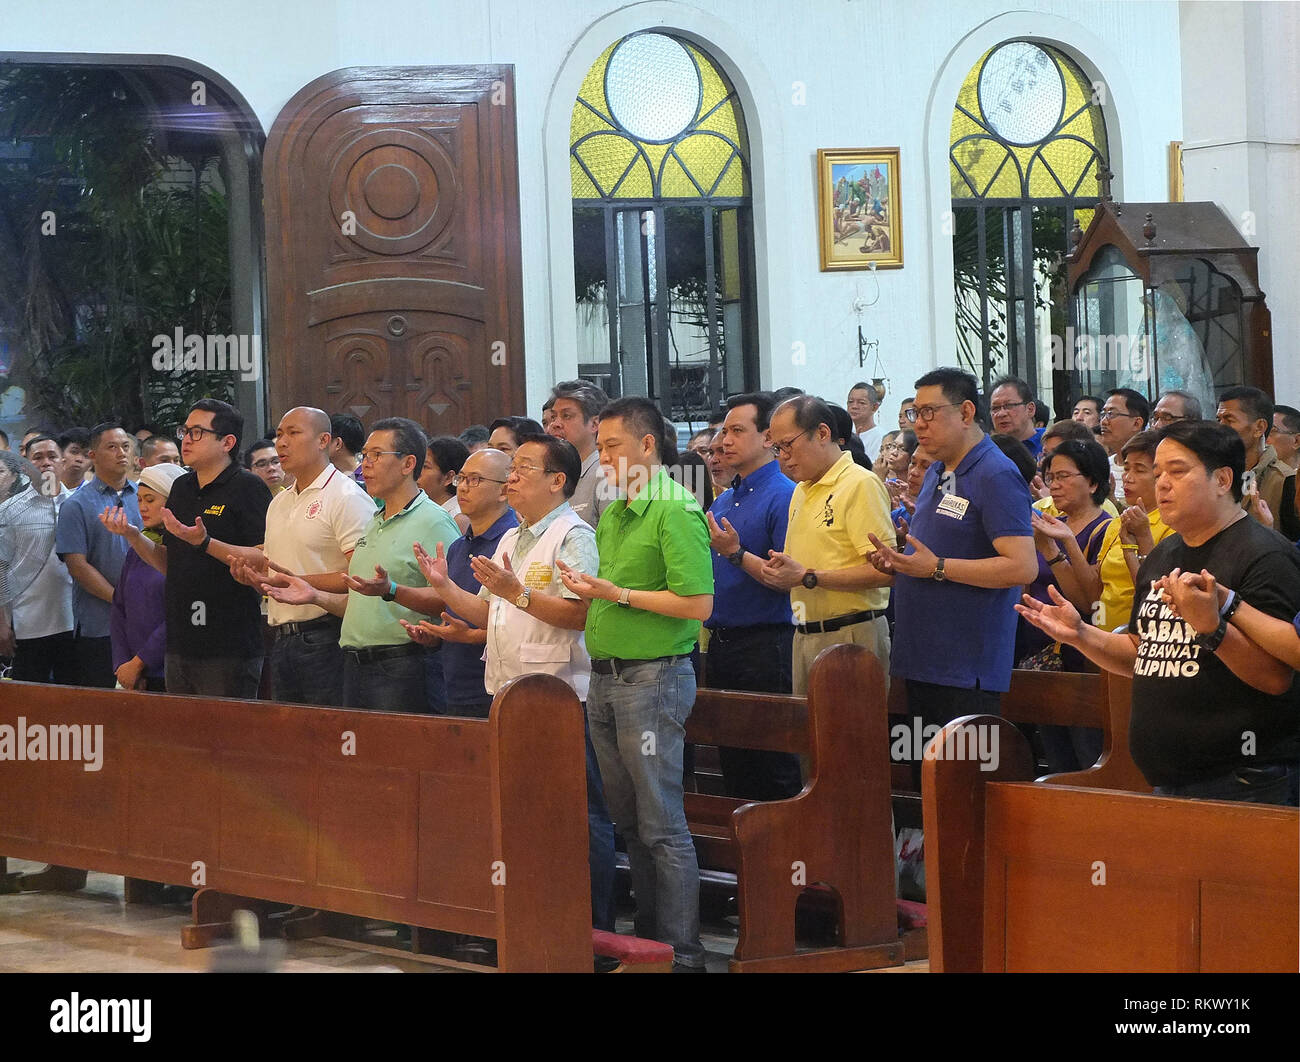 The eight Senatorial candidates with former President Benigno 'Noynoy' Aquino III seen joining hands in a celebrated mass in San Roque Cathedral in Caloocan City during the campaign. The Opposition Senatorial candidates, known as 'Otso Diretso' (means vote straight the 8 senatorial bets) kicked off their campaigns in Caloocan City. The Senatorial slate composed of experienced but relatively unknown opposition bets appeal to voting population that still supports the ruling Duterte Administration. Stock Photo